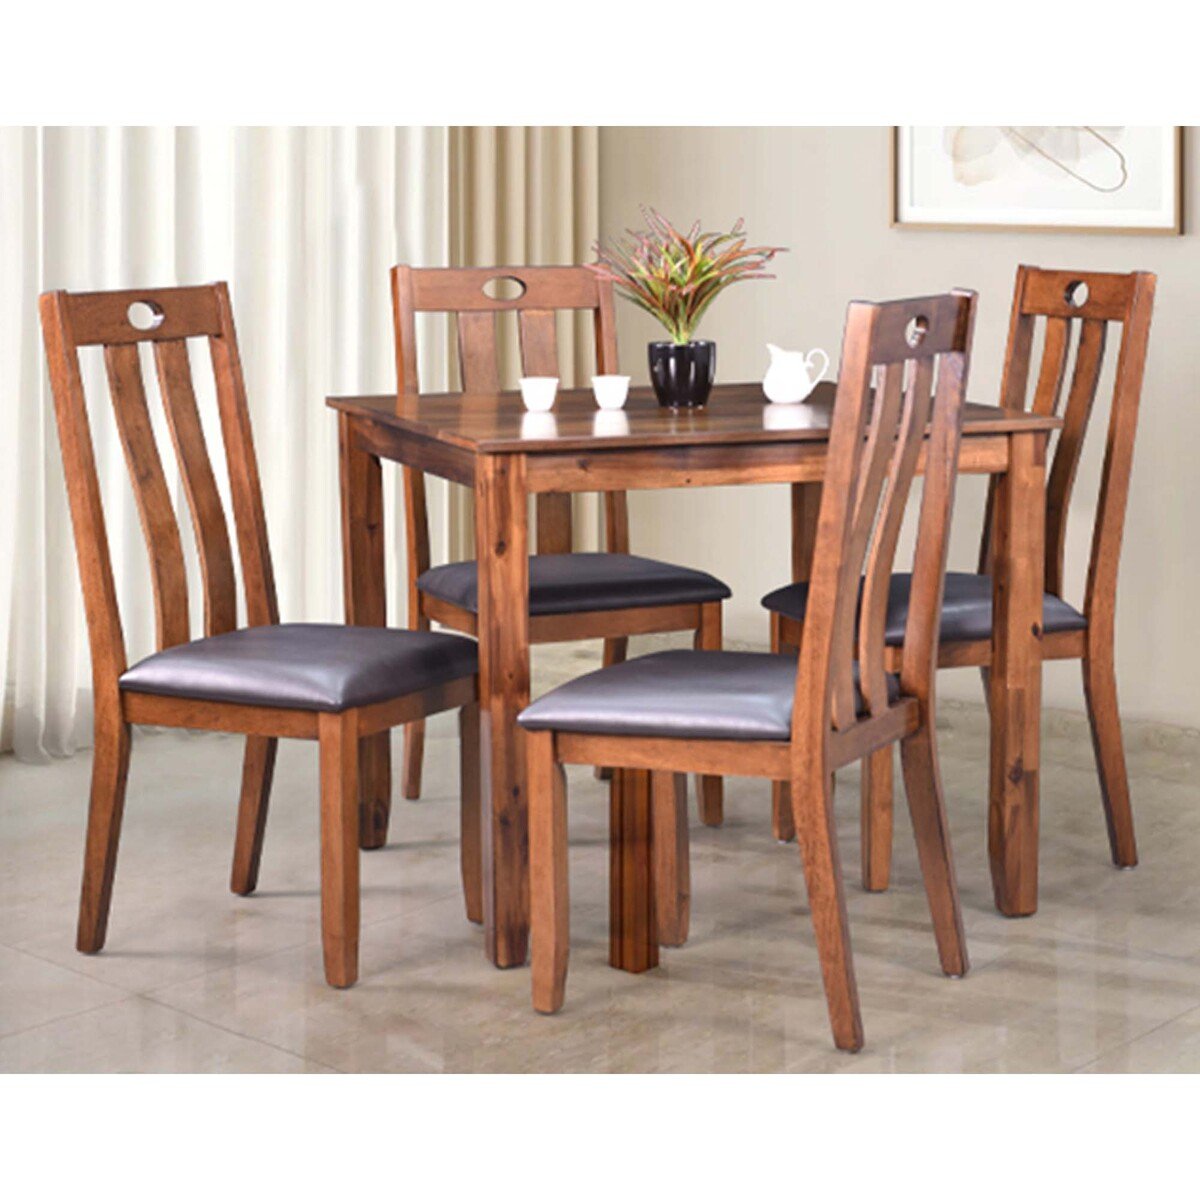 Maple Leaf Wooden Dining Table With 4 Chairs Walnut DT04